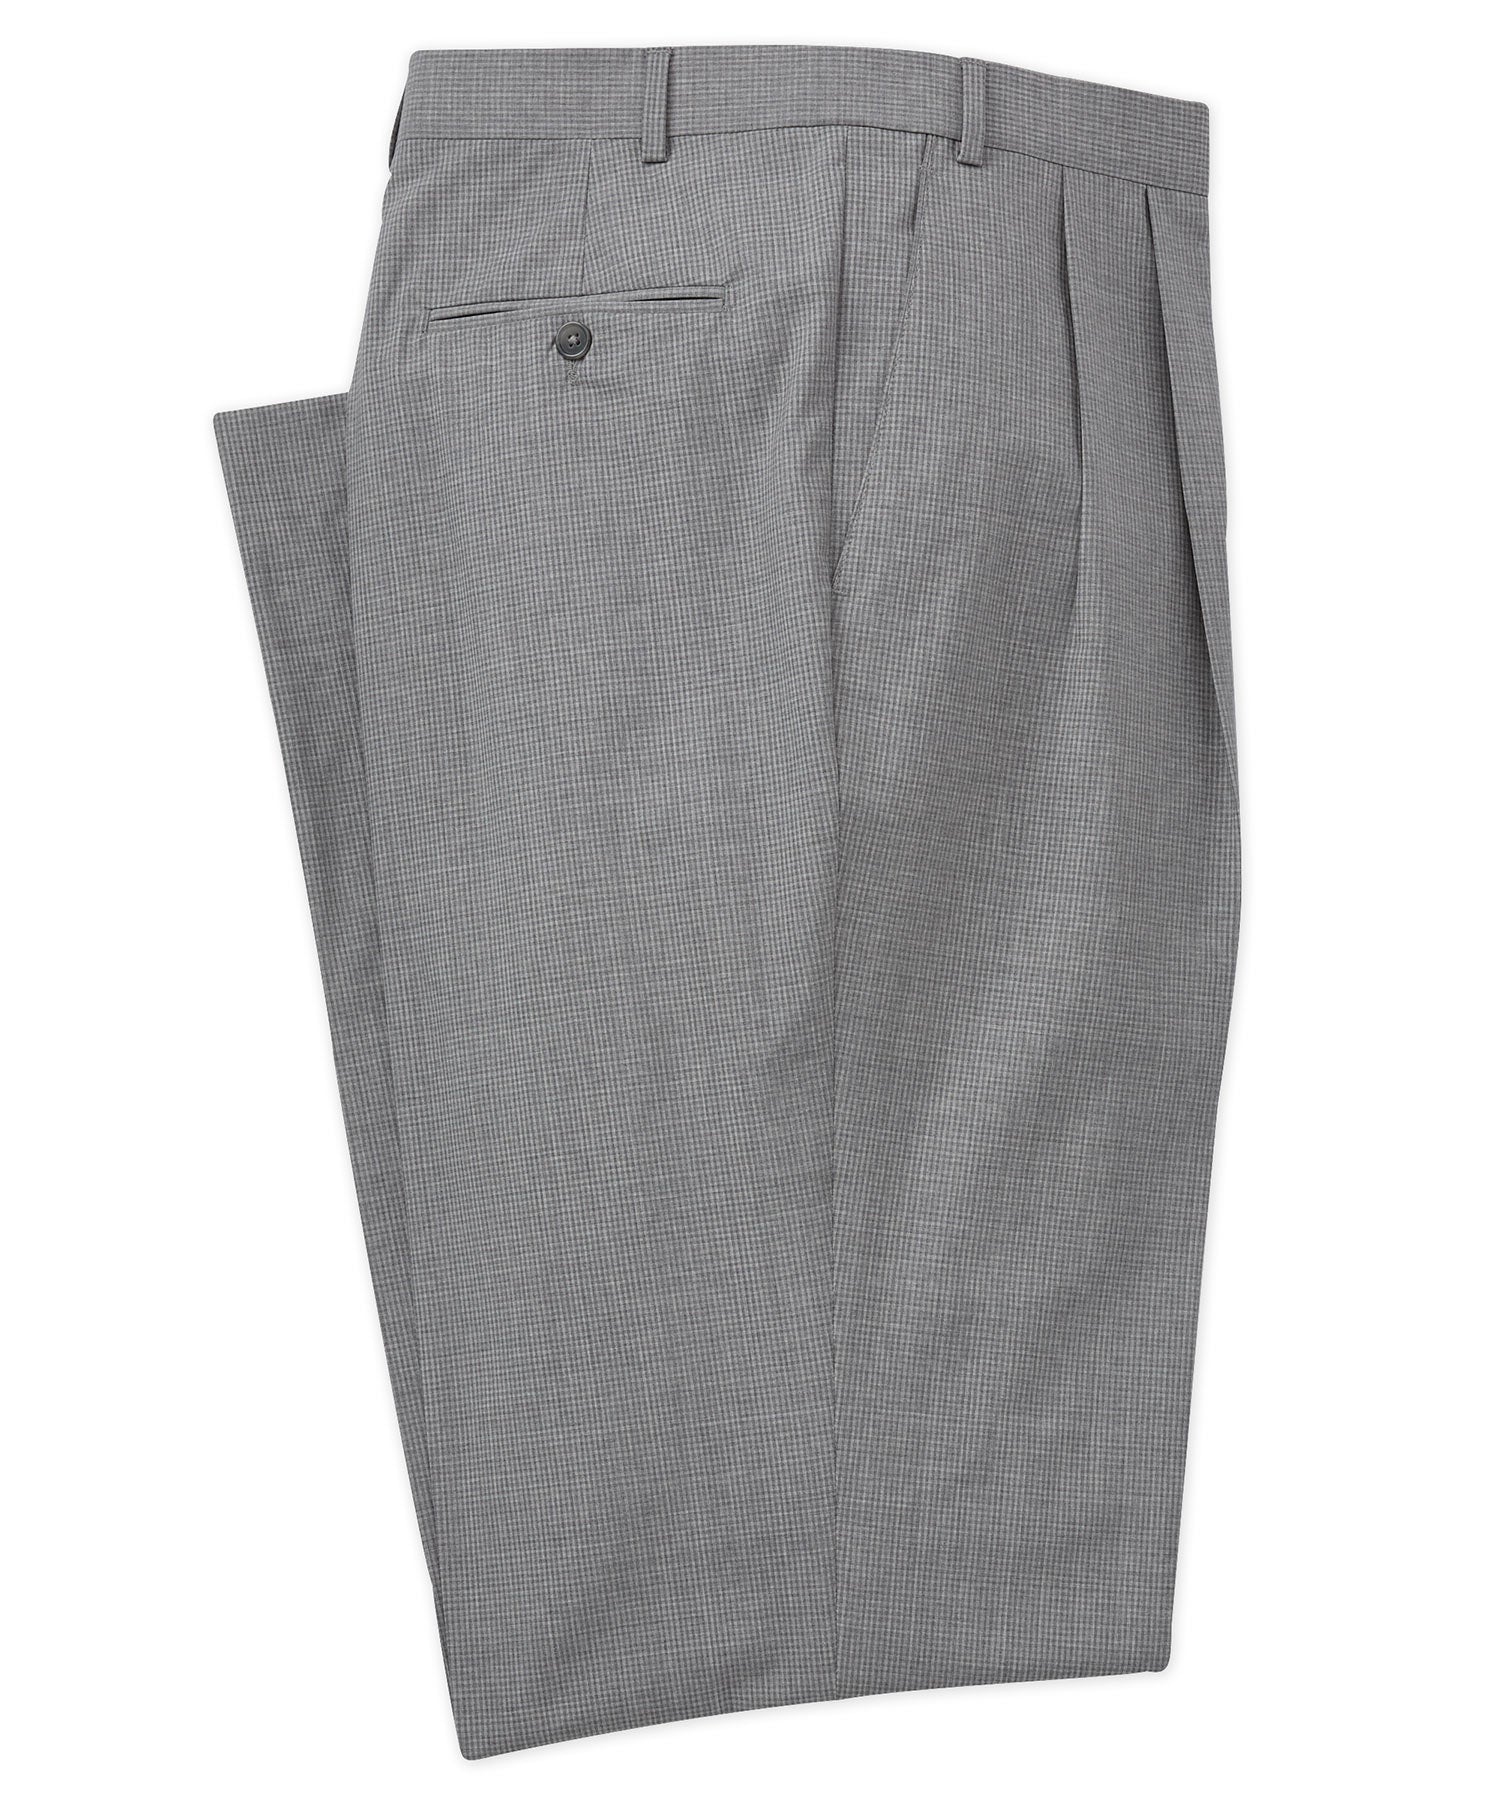 Jack Victor Super 130s 100% Reda Wool Pleated Check Patterned Dress Pants, Men's Big & Tall